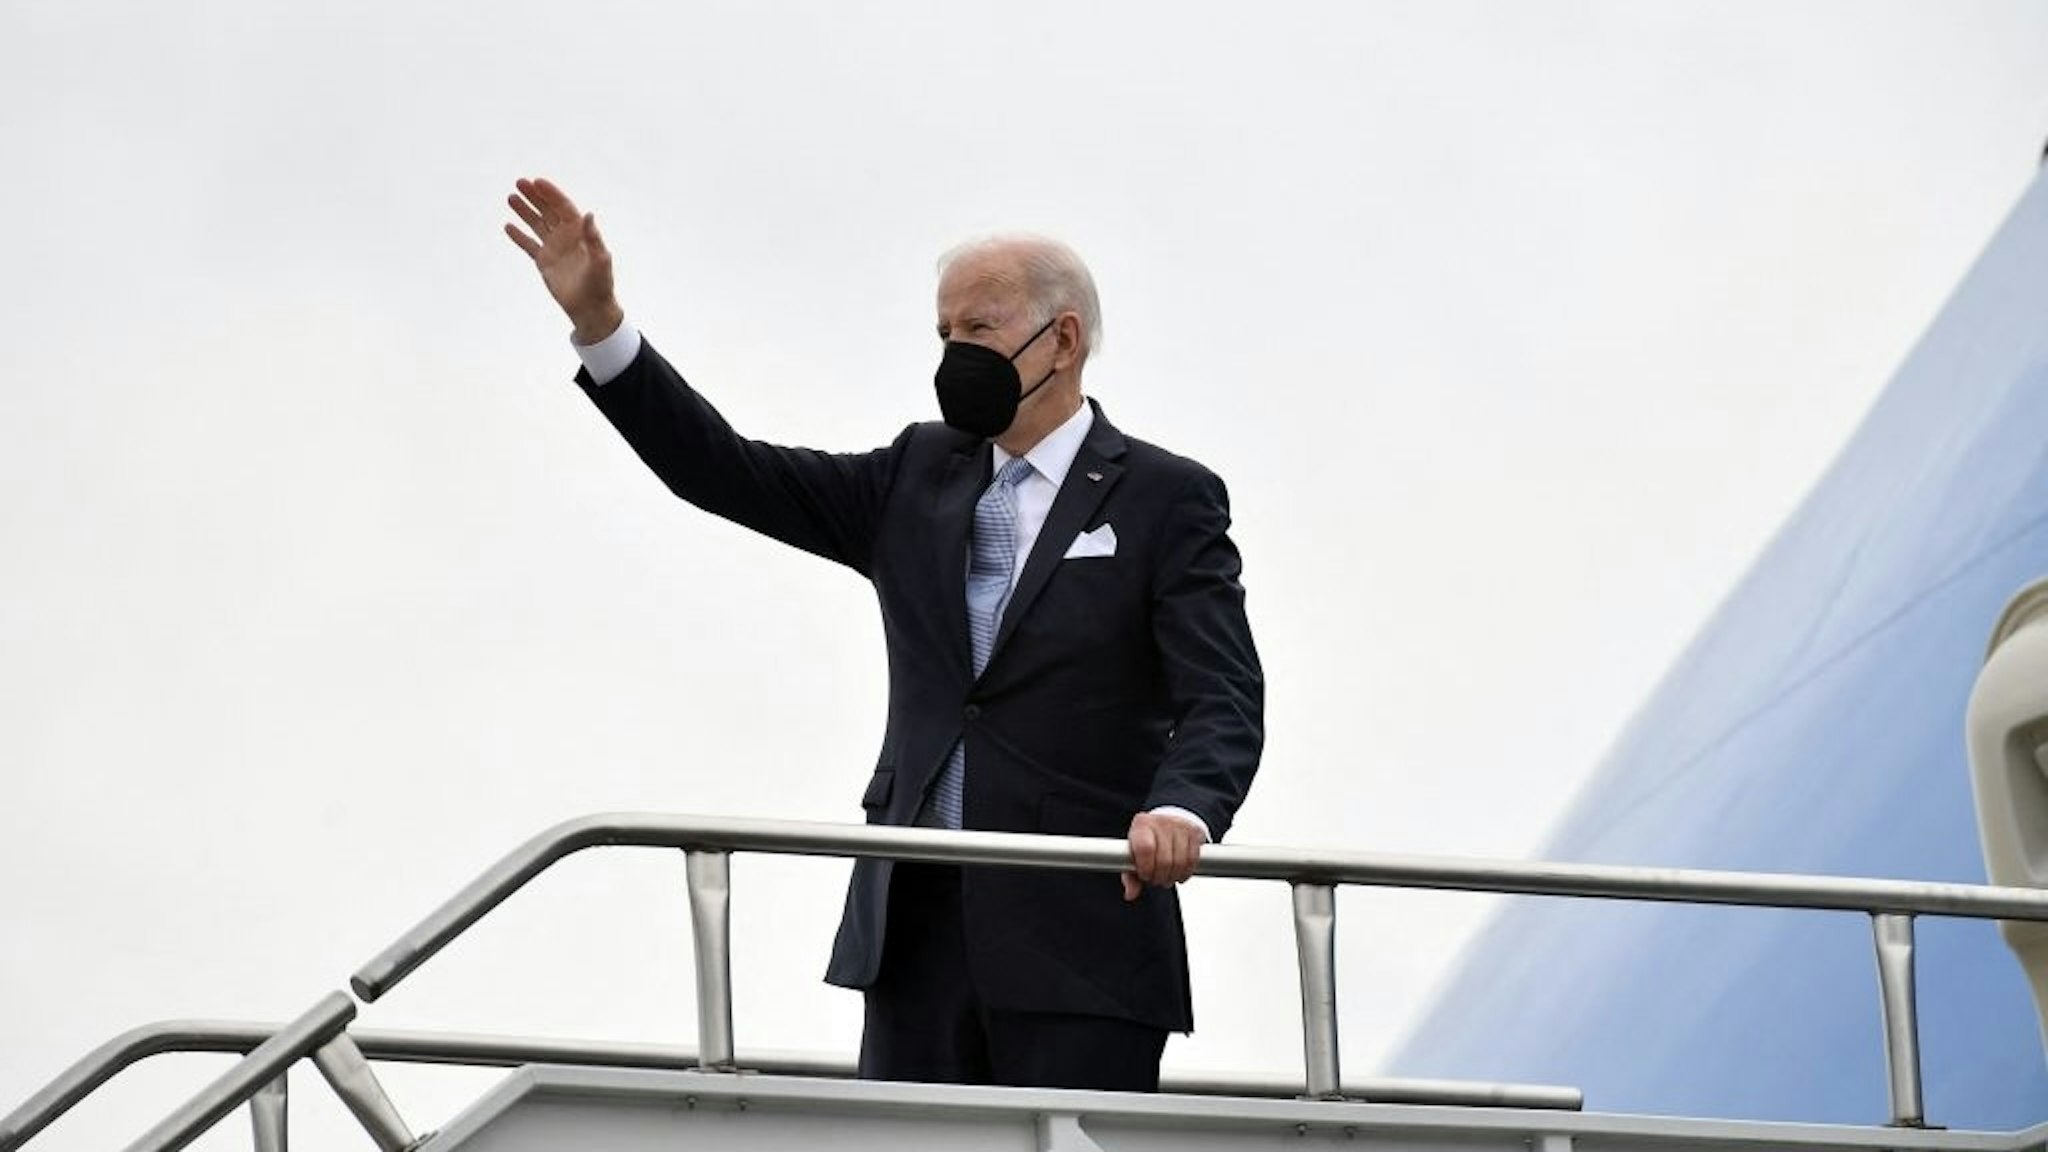 US-POLITICS-BIDEN US President Joe Biden waves as he boards Air Force One at Columbia Metropolitan Airport in West Columbia, South Carolina, on December 17, 2021. - President Biden is traveling to Wilmington, Delaware. (Photo by MANDEL NGAN / AFP) (Photo by MANDEL NGAN/AFP via Getty Images) MANDEL NGAN / Contributor